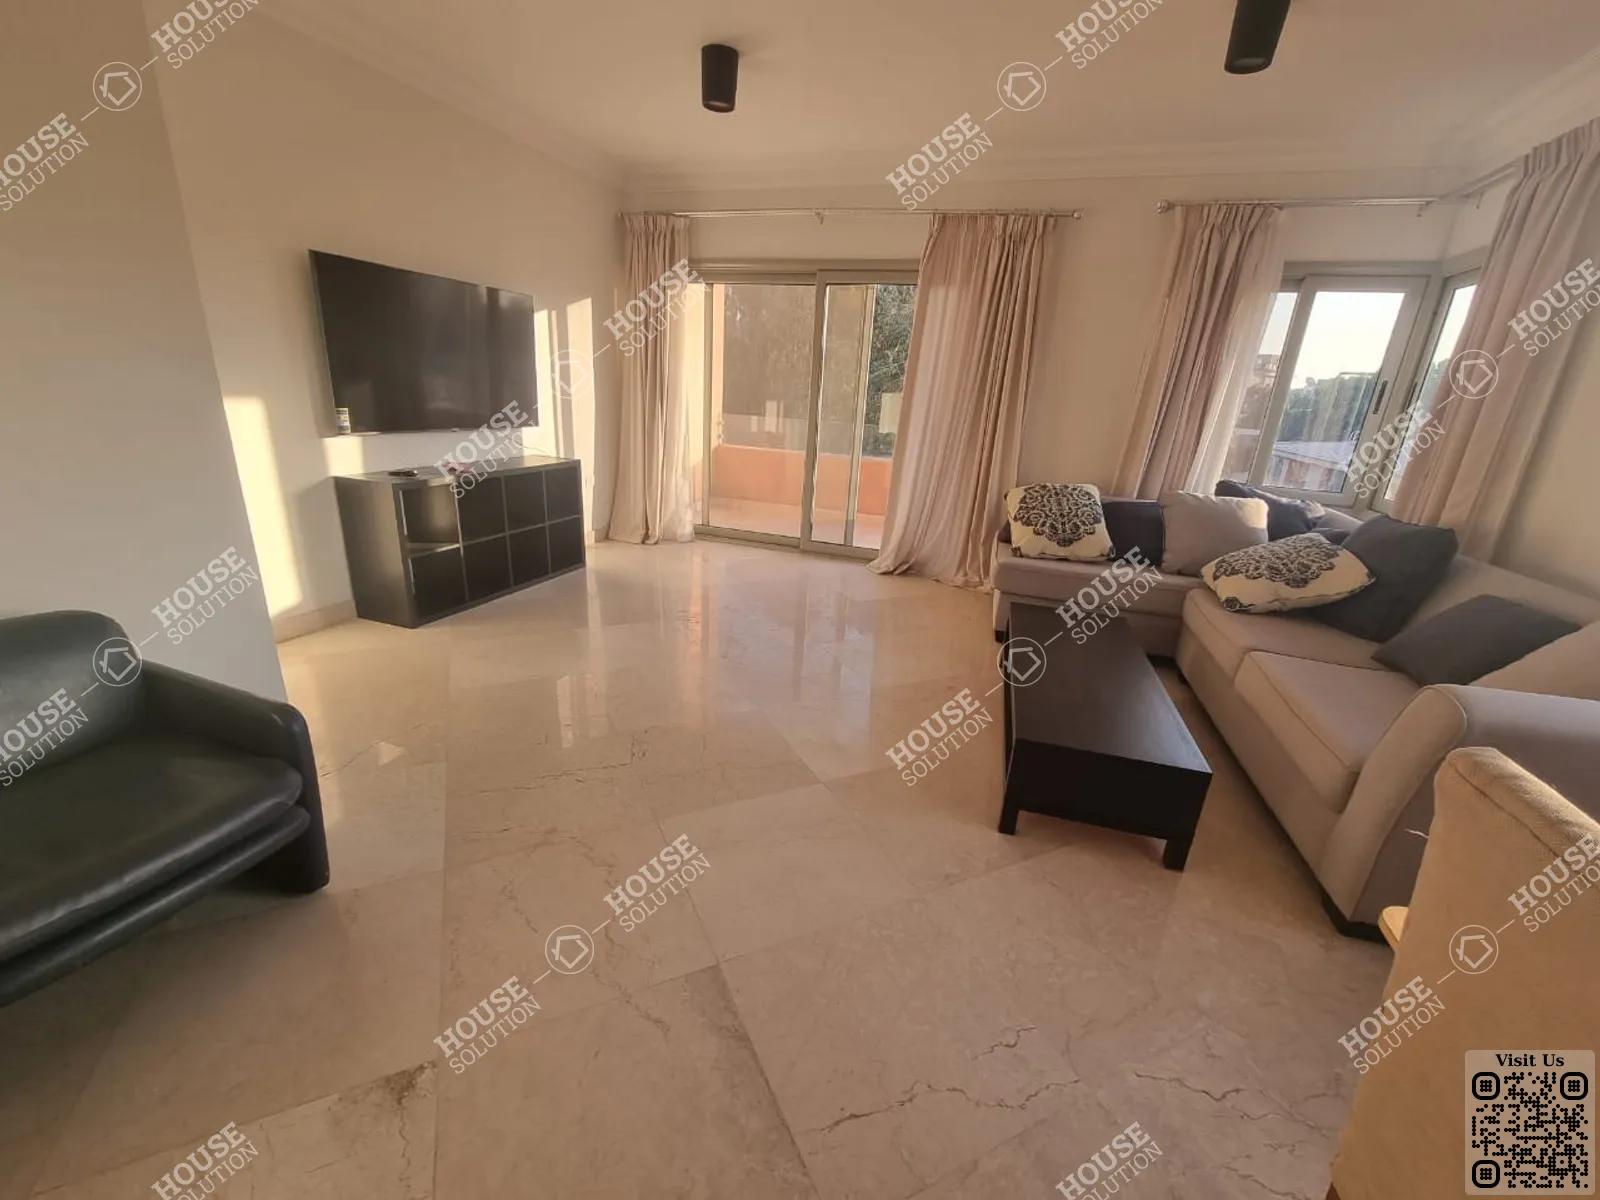 RECEPTION  @ Apartments For Rent In Maadi Maadi Degla Area: 185 m² consists of 2 Bedrooms 3 Bathrooms Modern furnished 5 stars #5627-0